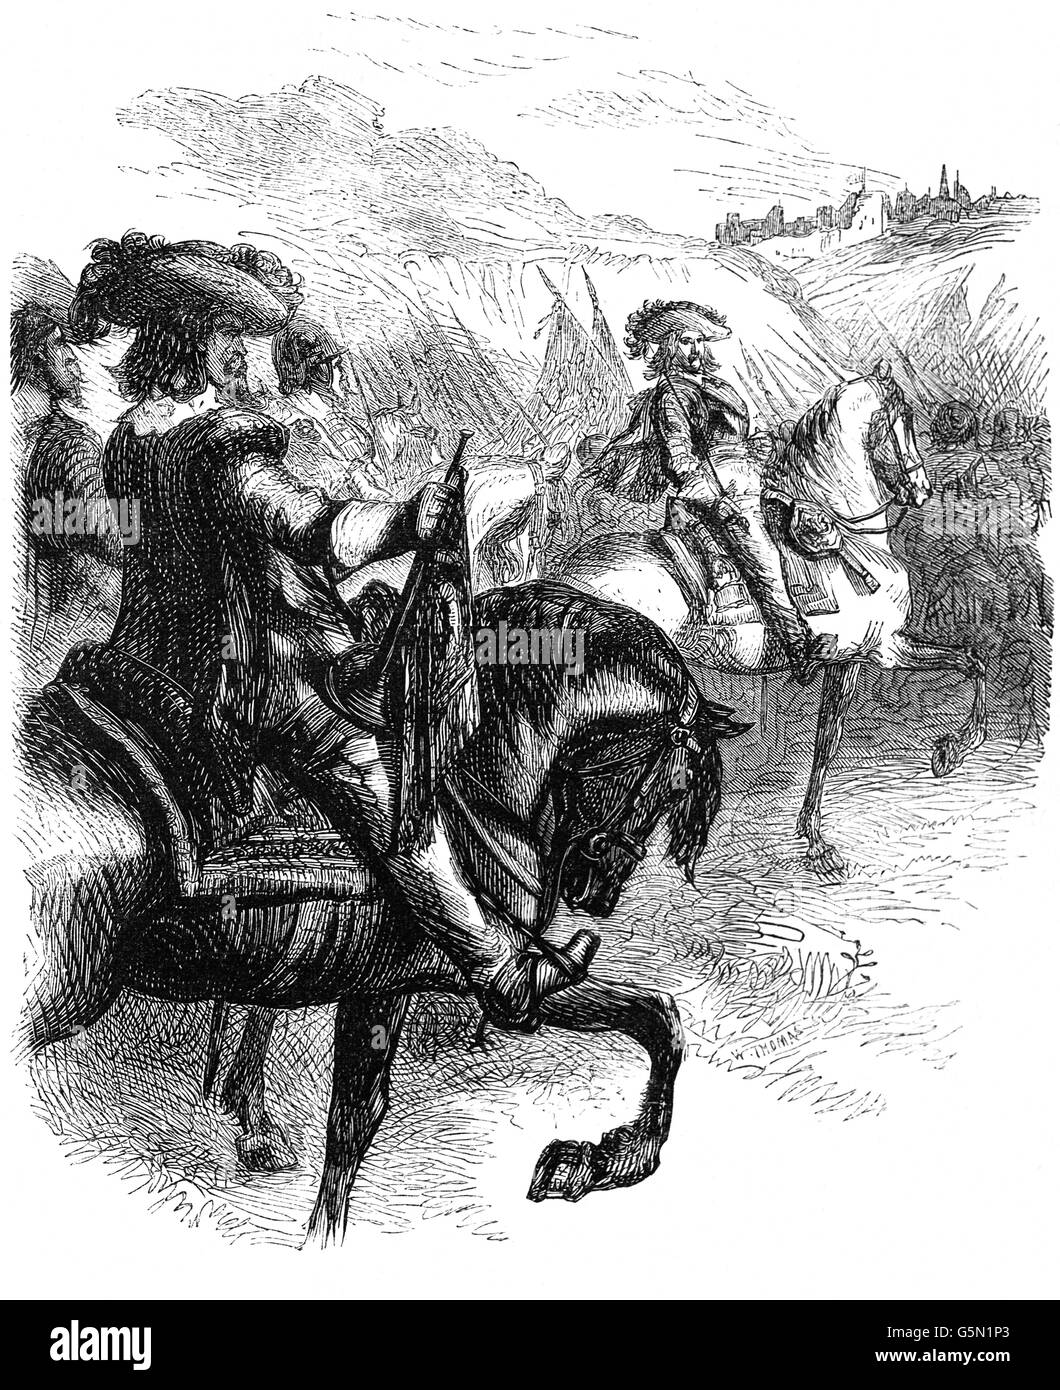 James Scott, 1st Duke of Monmouth attacking Taunton during the  Monmouth Rebellion. It was an attempt to overthrow Roman Catholic James II who became King  upon the death of Charles II in 1685.  James Scott, 1st Duke of Monmouth claimed to be rightful heir to the throne and attempted to displace James II. Stock Photo